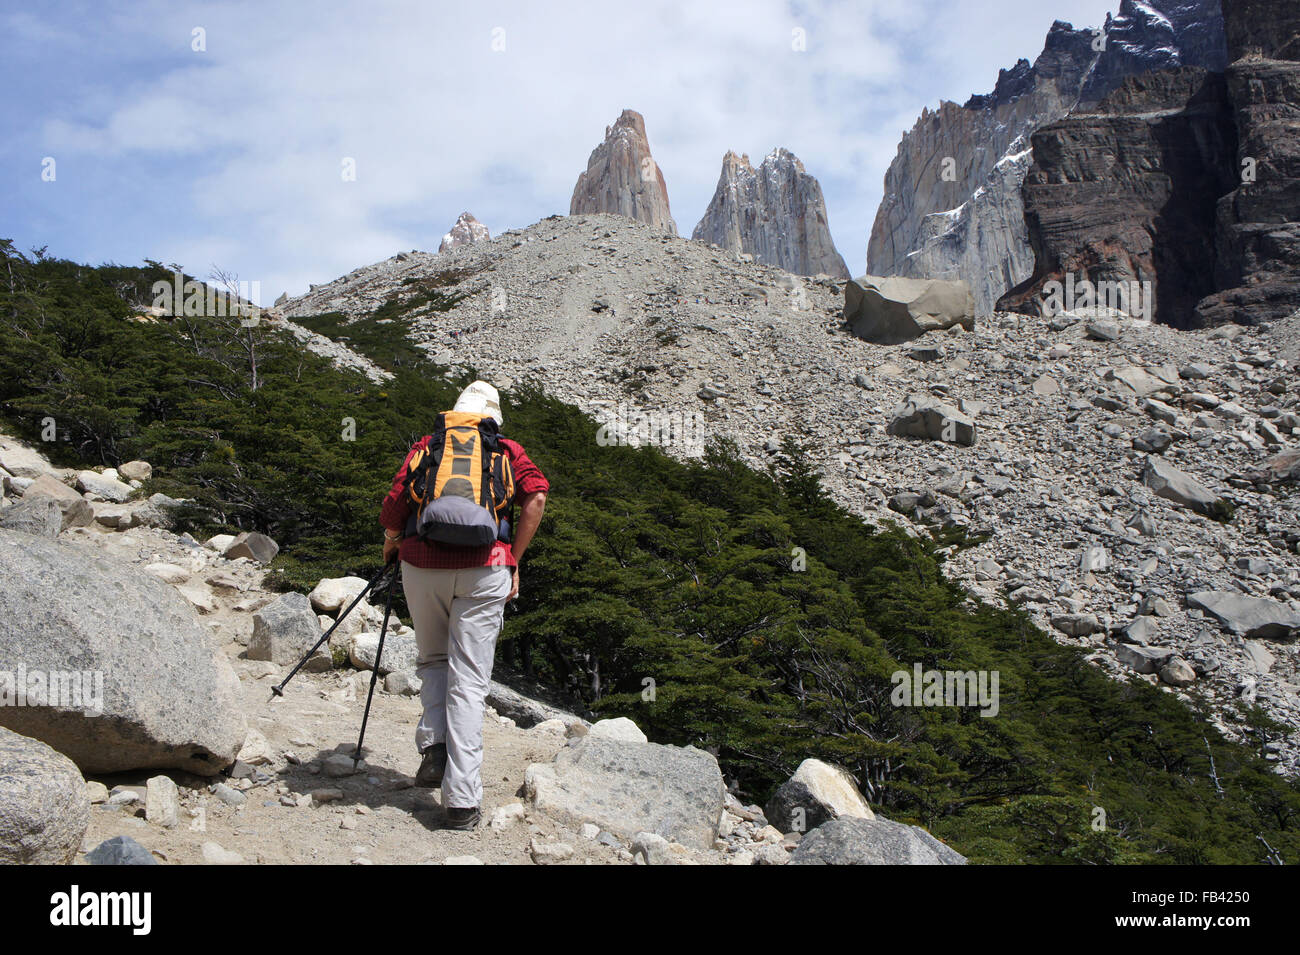 Hiker on trail to Mirador Torres del Paine, Patagonia, Chile Stock Photo